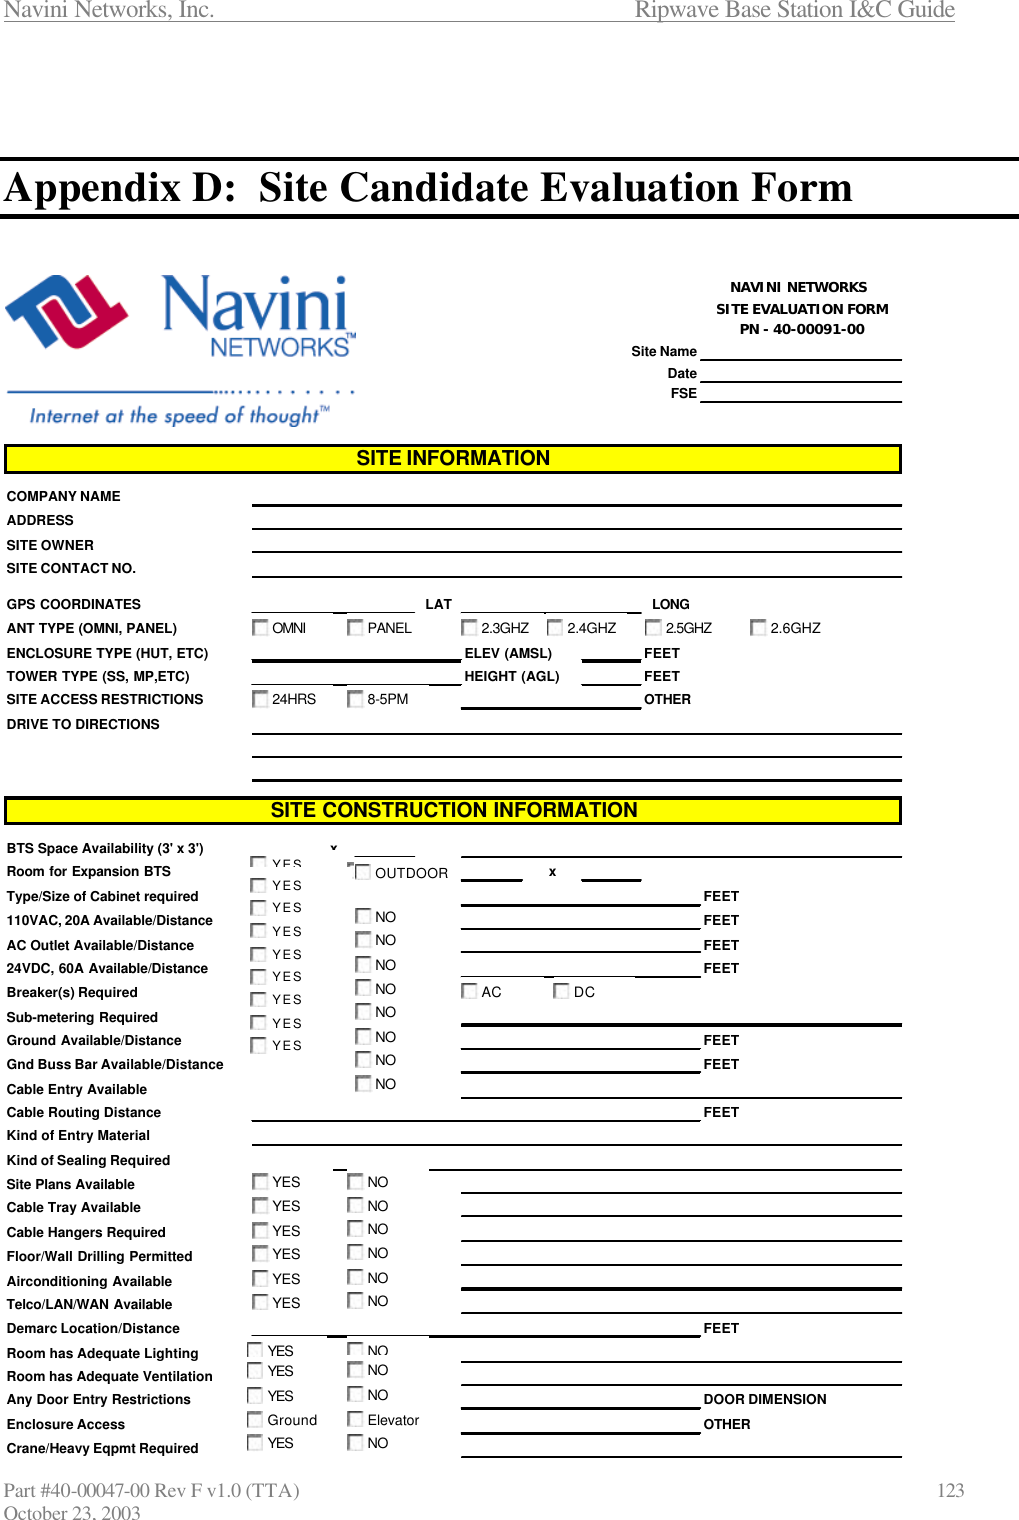 Navini Networks, Inc.                      Ripwave Base Station I&amp;C Guide Part #40-00047-00 Rev F v1.0 (TTA)                            123 October 23, 2003    Appendix D:  Site Candidate Evaluation Form   NAVINI NETWORKS SITE EVALUATION FORMPN - 40-00091-00Site NameDateFSECOMPANY NAMEADDRESSSITE OWNERSITE CONTACT NO.GPS COORDINATES LAT LONGANT TYPE (OMNI, PANEL)ENCLOSURE TYPE (HUT, ETC) ELEV (AMSL) FEETTOWER TYPE (SS, MP,ETC) HEIGHT (AGL) FEETSITE ACCESS RESTRICTIONS OTHERDRIVE TO DIRECTIONSBTS Space Availability (3&apos; x 3&apos;) xRoom for Expansion BTS xType/Size of Cabinet required FEET110VAC, 20A Available/Distance FEETAC Outlet Available/Distance FEET24VDC, 60A Available/Distance FEETBreaker(s) RequiredSub-metering RequiredGround Available/Distance FEETGnd Buss Bar Available/Distance FEETCable Entry AvailableCable Routing Distance FEETKind of Entry MaterialKind of Sealing RequiredSite Plans AvailableCable Tray AvailableCable Hangers RequiredFloor/Wall Drilling PermittedAirconditioning AvailableTelco/LAN/WAN AvailableDemarc Location/Distance FEETRoom has Adequate LightingRoom has Adequate VentilationAny Door Entry Restrictions DOOR DIMENSIONEnclosure Access OTHERCrane/Heavy Eqpmt RequiredSITE INFORMATIONSITE CONSTRUCTION INFORMATIONYESNOINDOOROUTDOOROMNIPANEL2.3GHZ2.4GHZ24HRS8-5PMYESNOYESNOYESNOYESNOYESNOYESNOYESNOYESNOYESNOGroundElevatorYESNOACDCNOYESNOYESNOYESNOYESNOYESNOYESNOYESNOYES2.5GHZ2.6GHZ